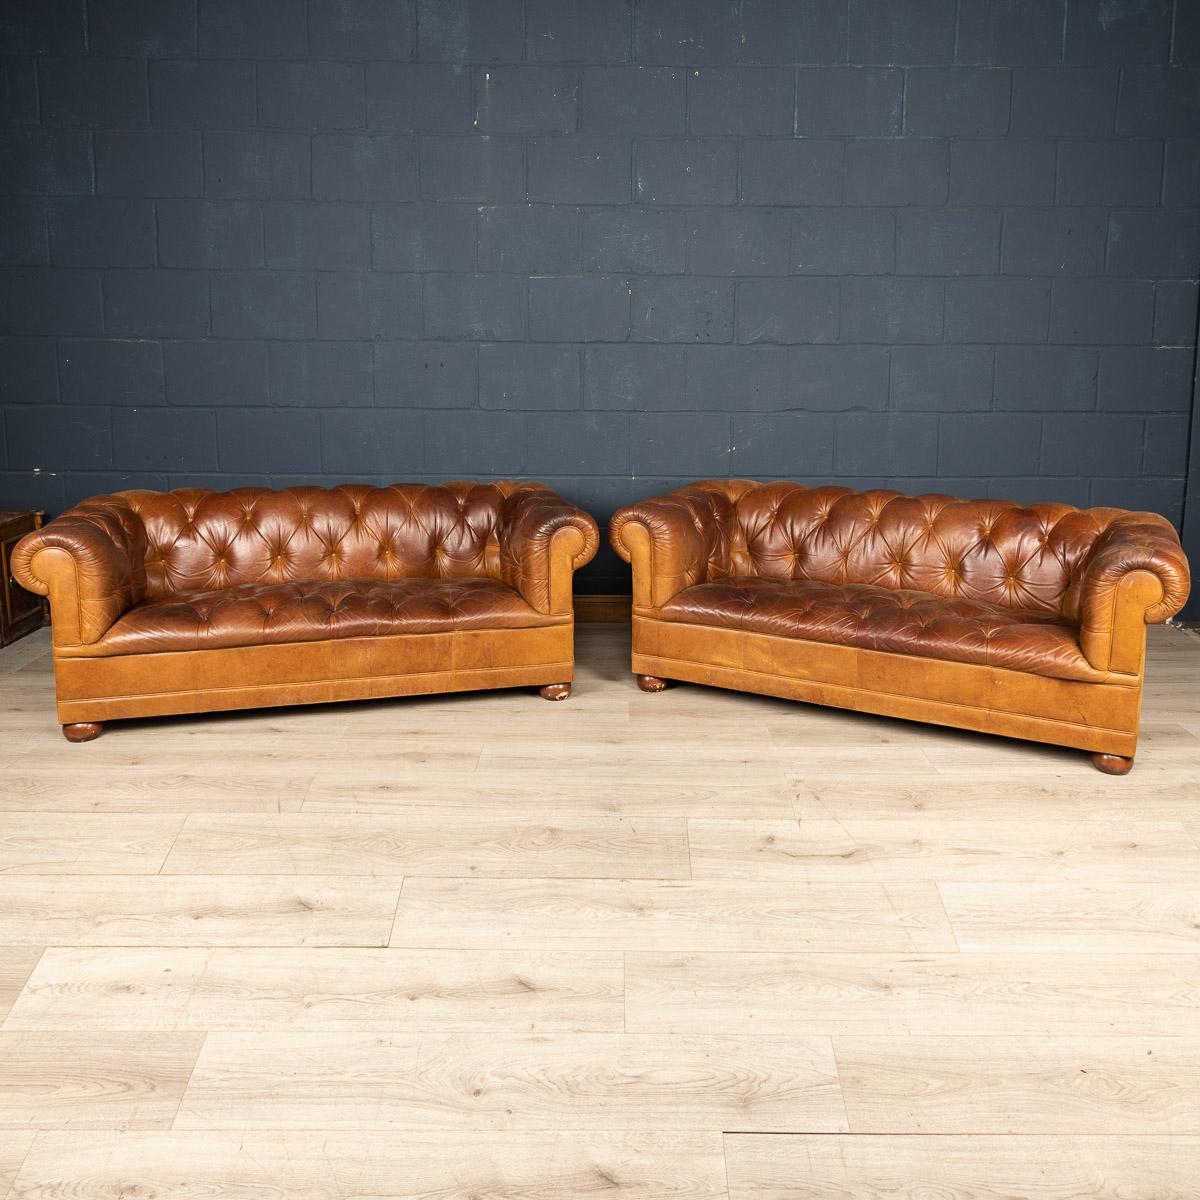 British Pair of 20th Century Chesterfield Leather Sofas By Laura Ashley, c.1970